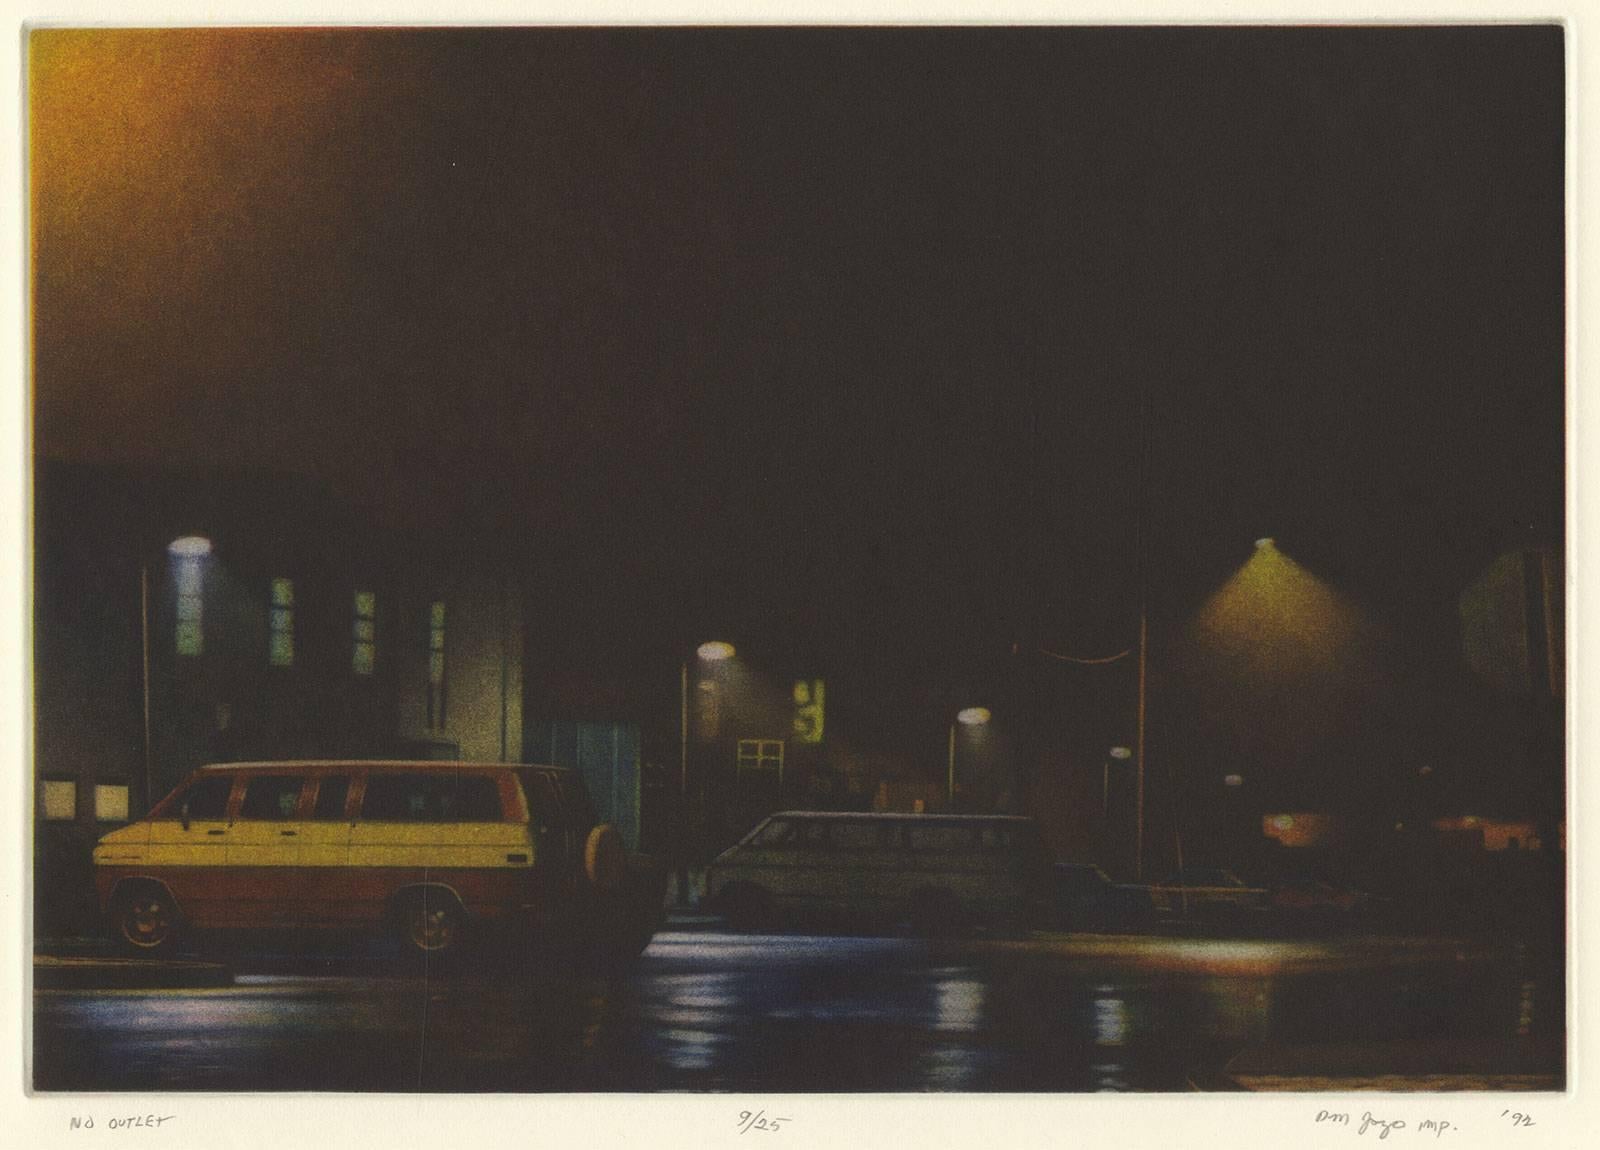 Peter Jogo Landscape Print - No  Outlet (night scene with parked vans in suburban setting on dead end)